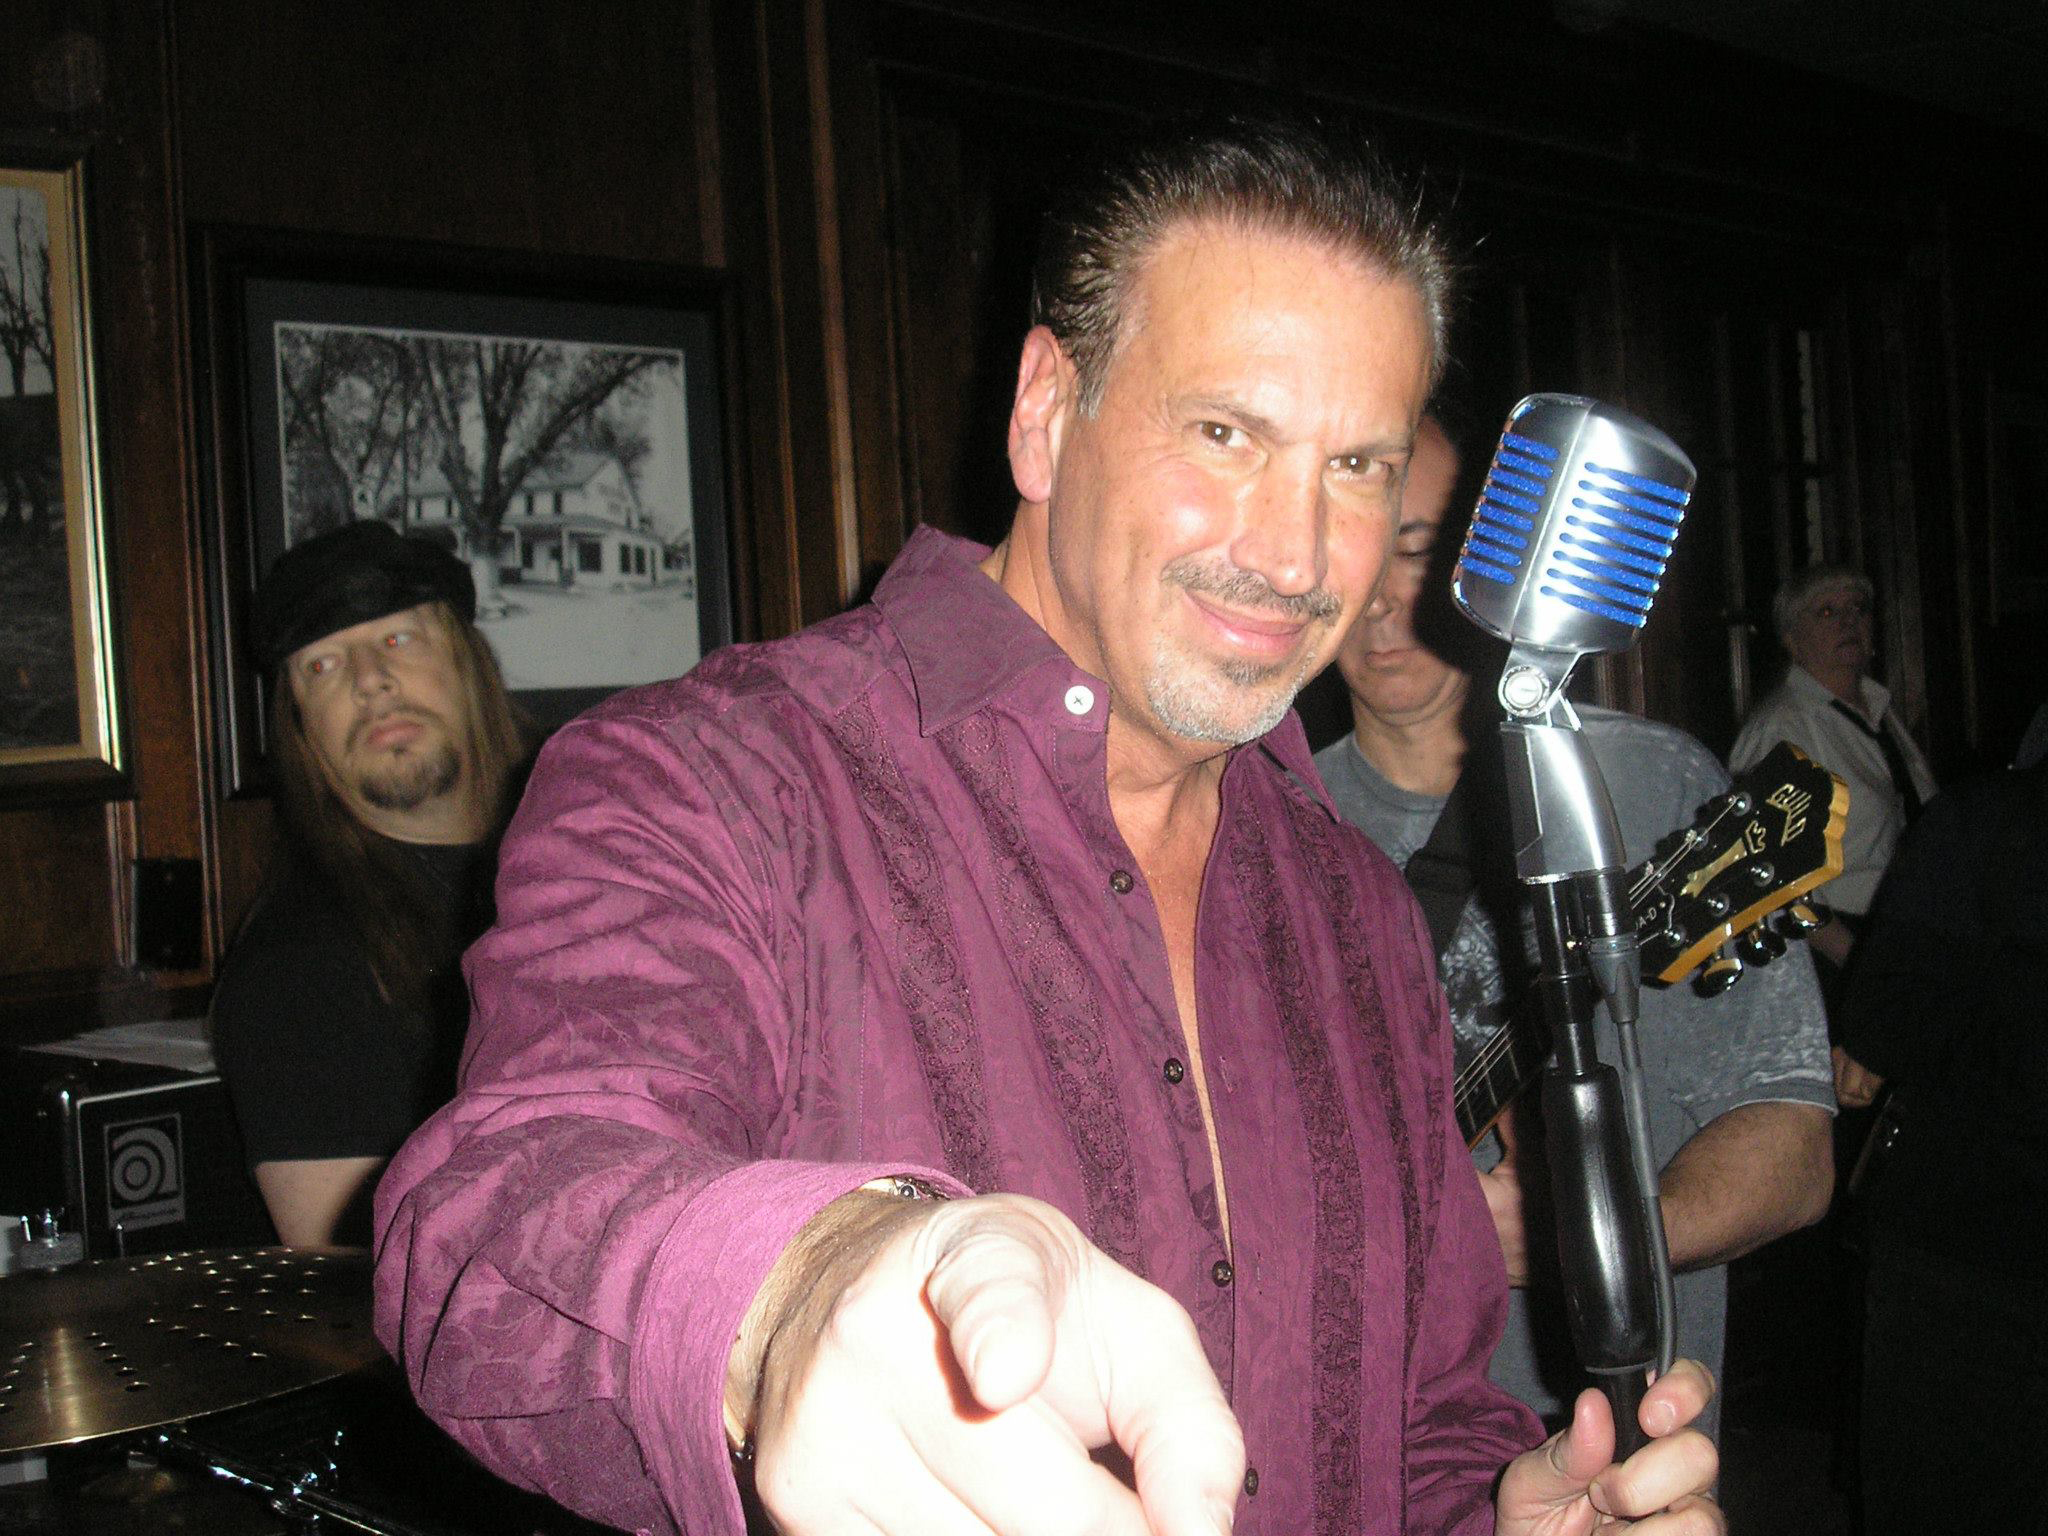 Barry gets behind the mic with the Rock of Ages band